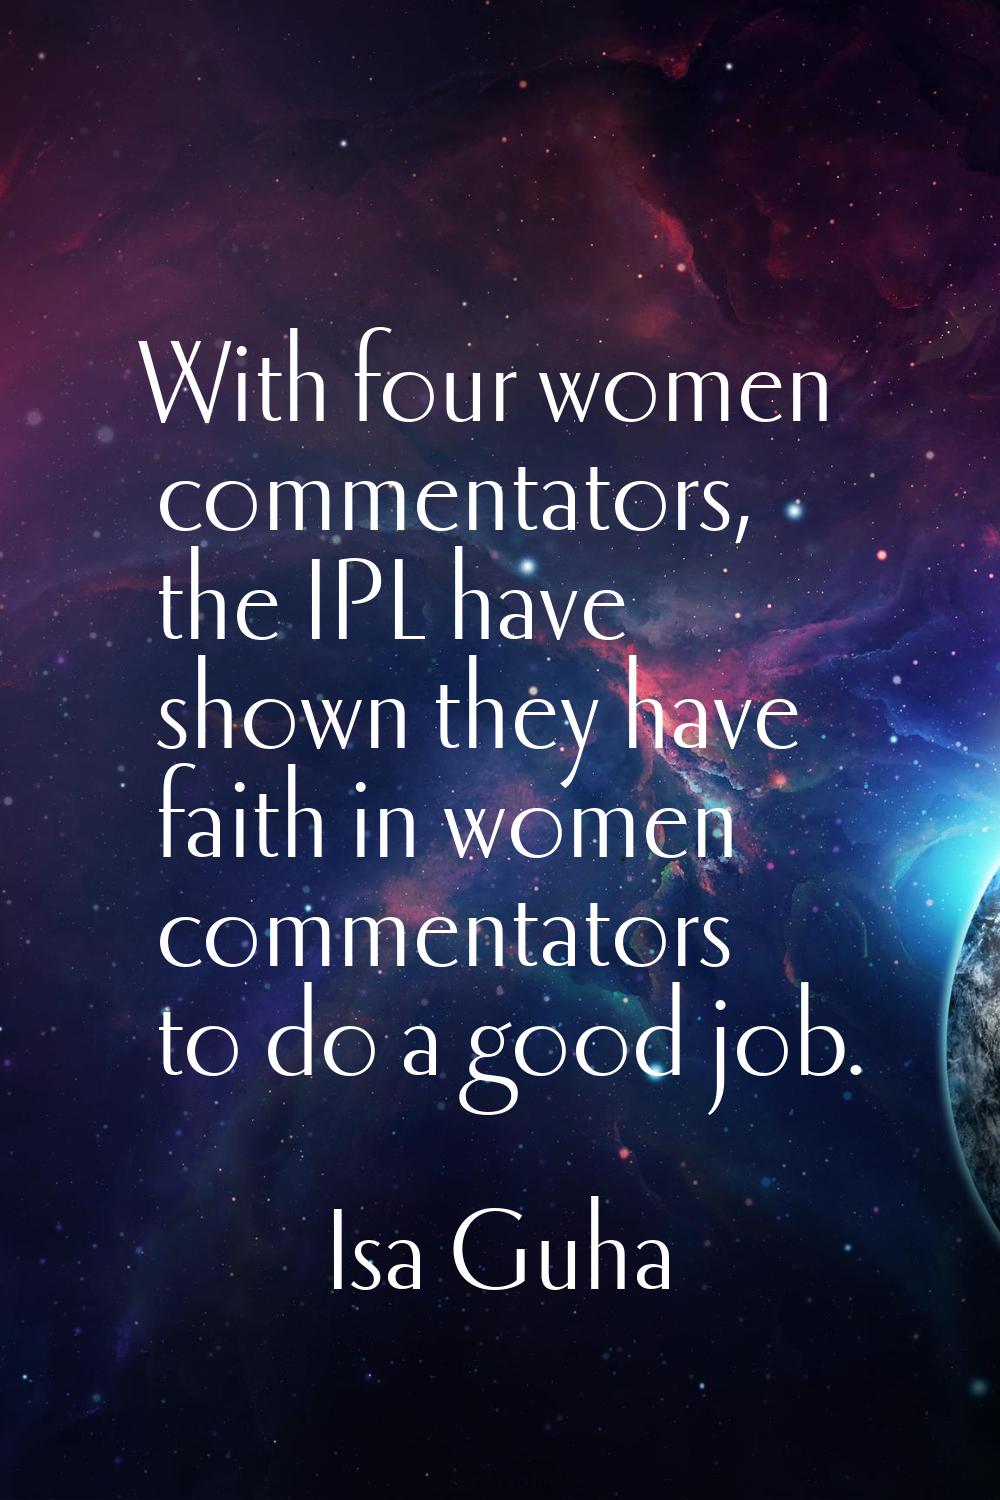 With four women commentators, the IPL have shown they have faith in women commentators to do a good